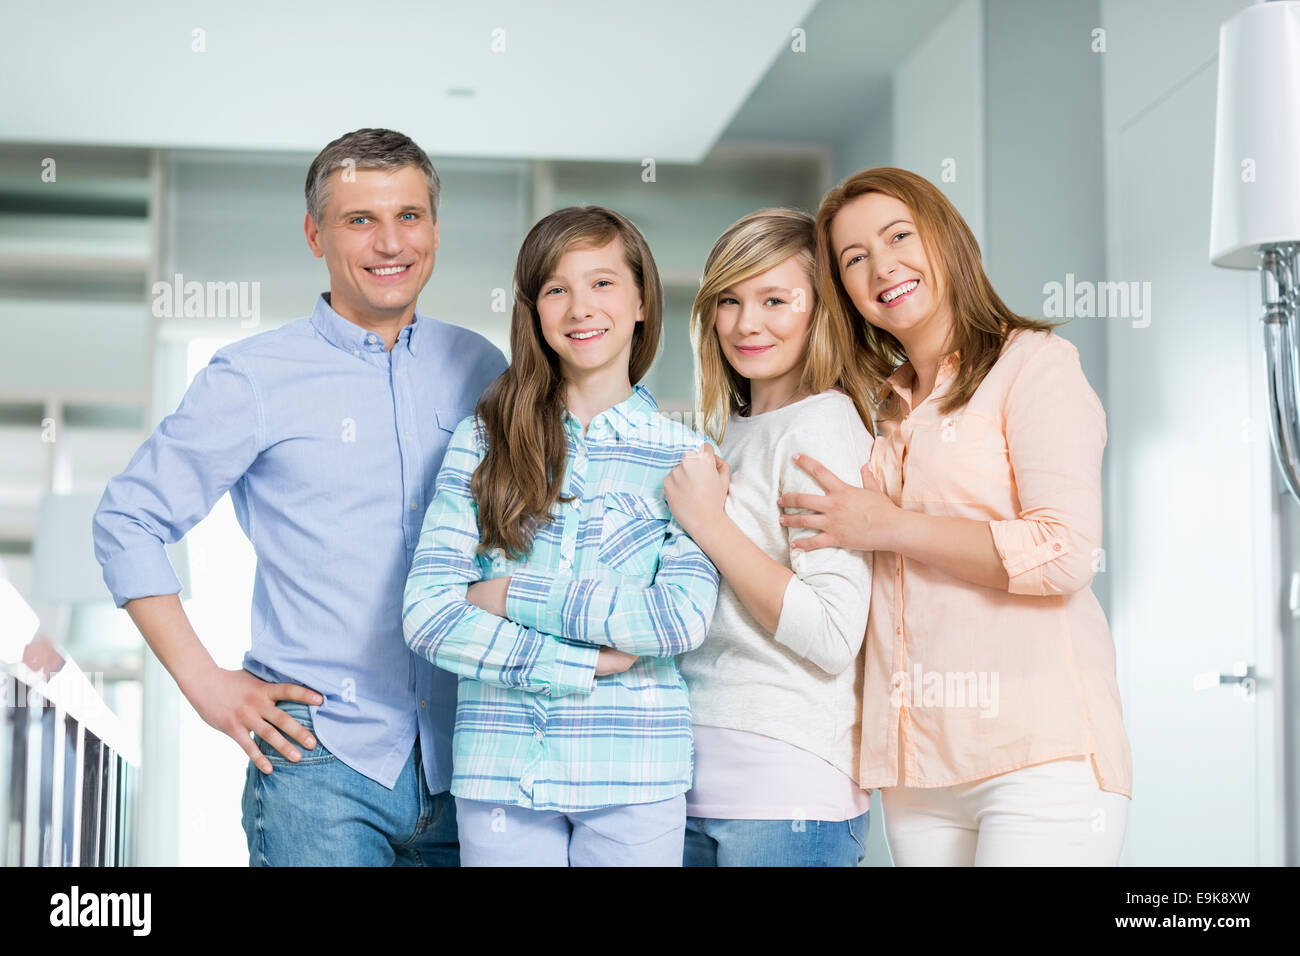 Portrait of happy family with children standing together at home Stock Photo